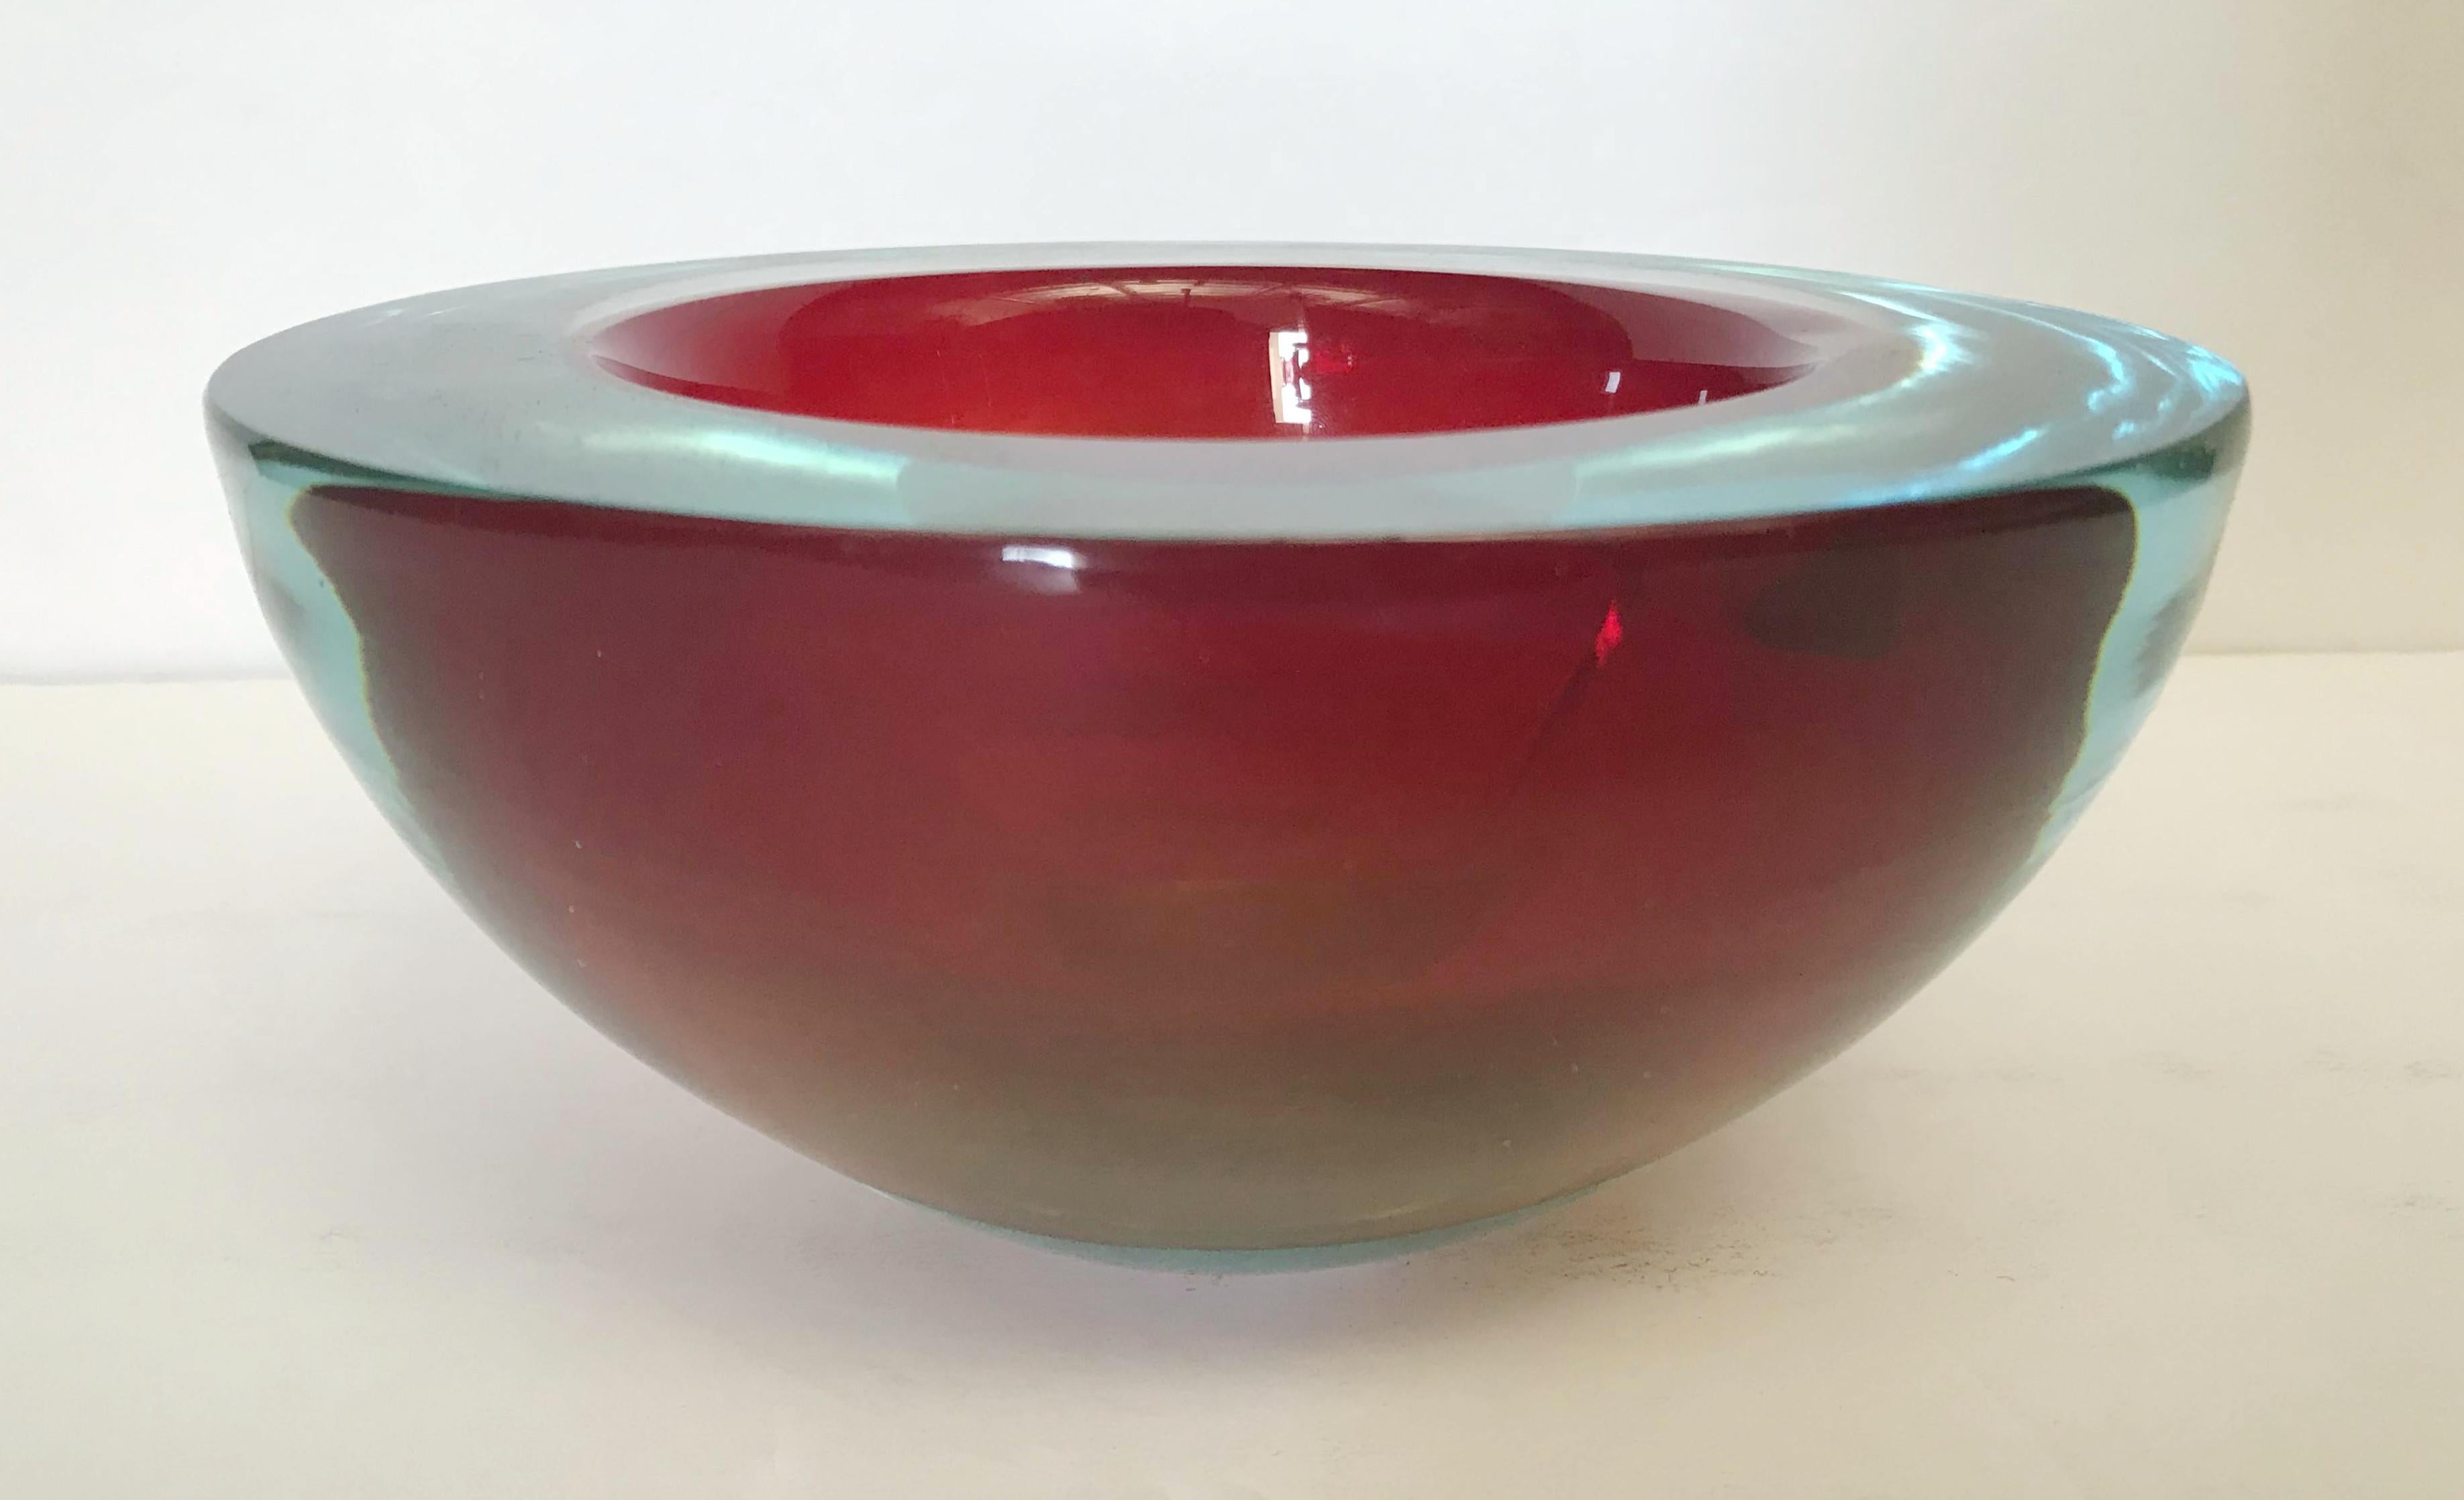 Vintage Italian red Murano glass bowl blown in Sommerso technique / Made in Italy, circa 1960s
Measures: Diameter 6.5 inches, height 3 inches
1 in stock in Palm Springs currently ON FINAL CLEARANCE SALE for $599 !!! 
This piece makes for a great and